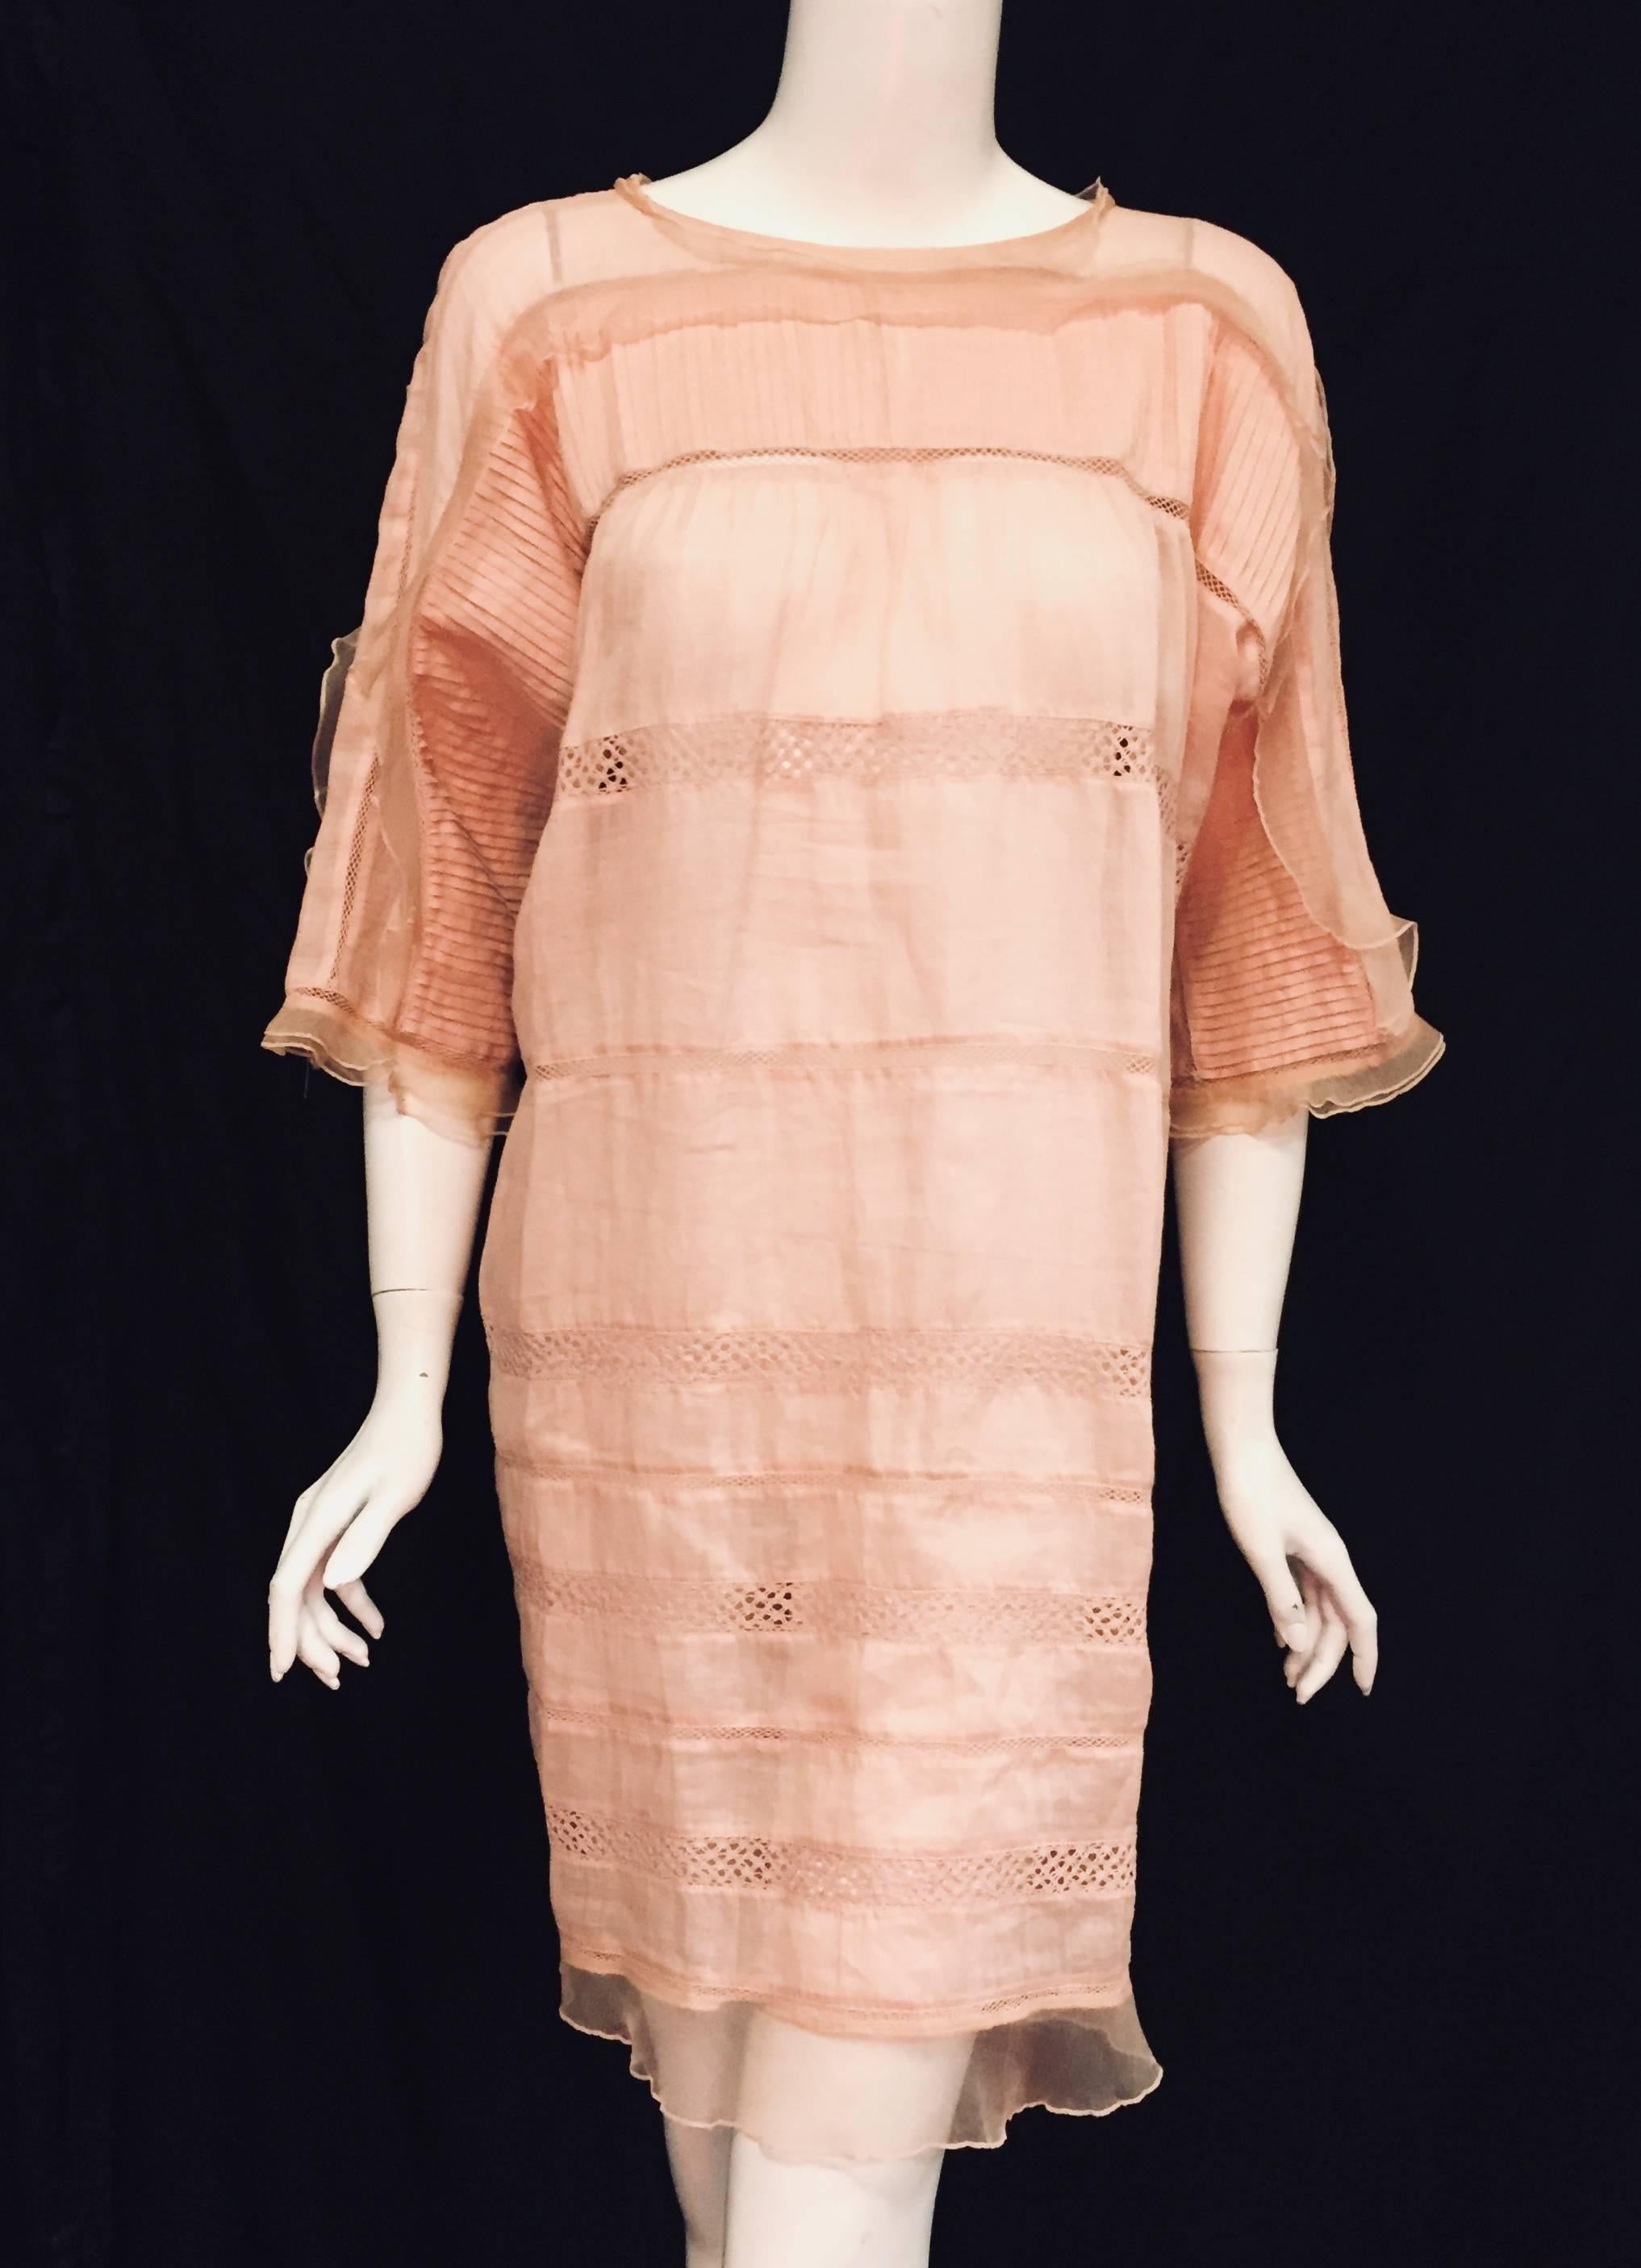 Isabel Marant Peach Ramie and Silk Dress is not only ultra-feminine, but also is light, and ethereal. This sublime and sophisticated confection is also the ultimate in Summer chic! Features include round neckline, elbow length sleeves and generous